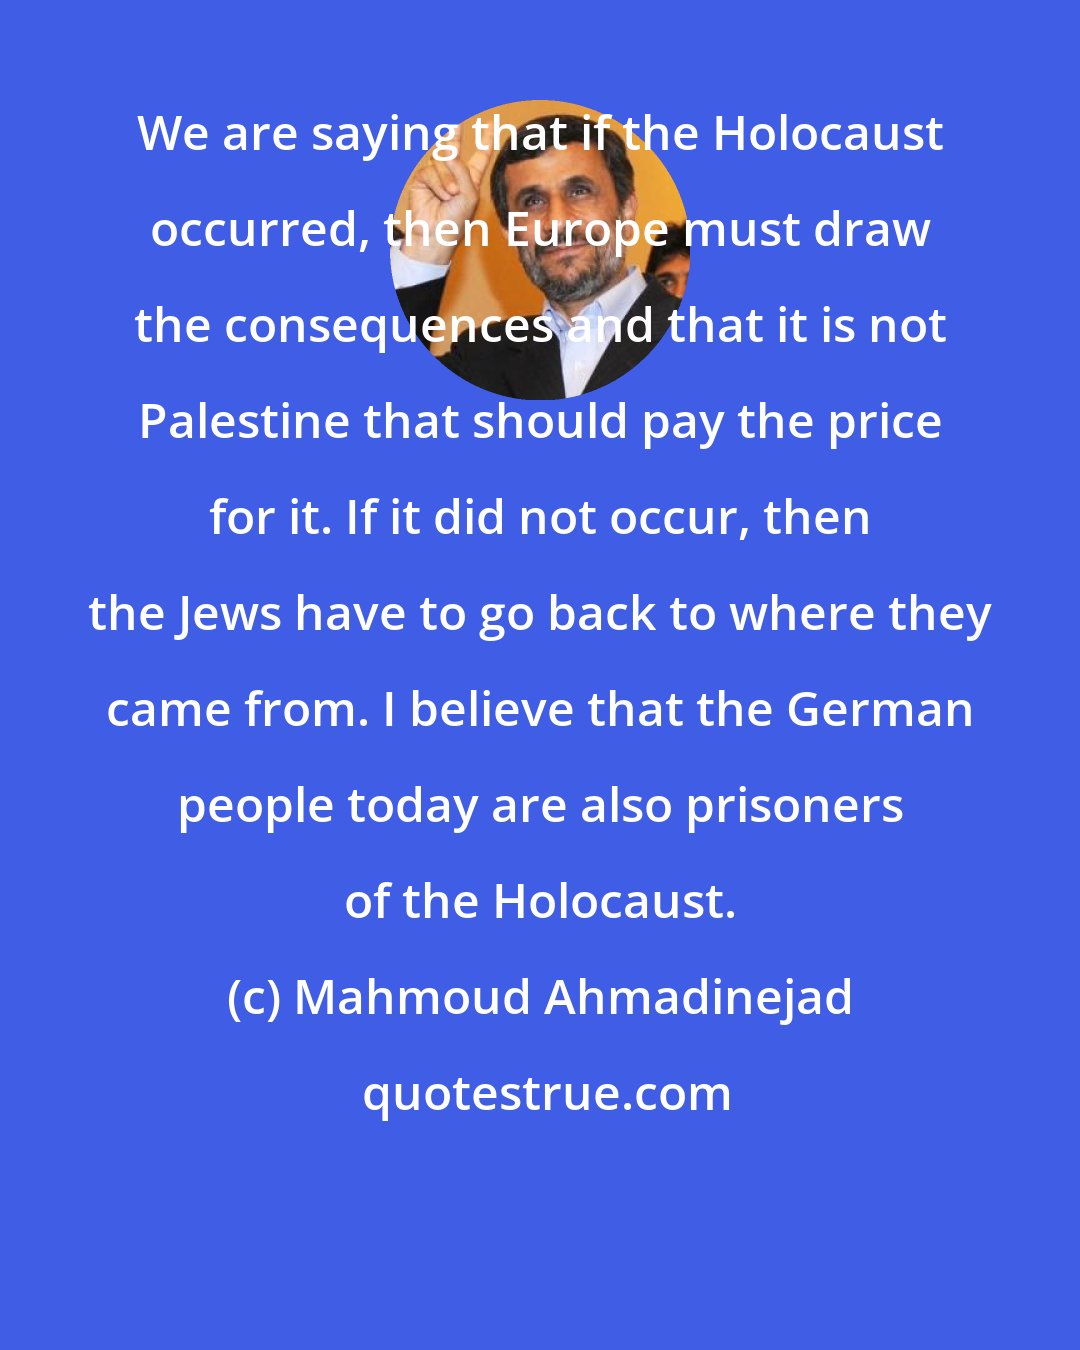 Mahmoud Ahmadinejad: We are saying that if the Holocaust occurred, then Europe must draw the consequences and that it is not Palestine that should pay the price for it. If it did not occur, then the Jews have to go back to where they came from. I believe that the German people today are also prisoners of the Holocaust.